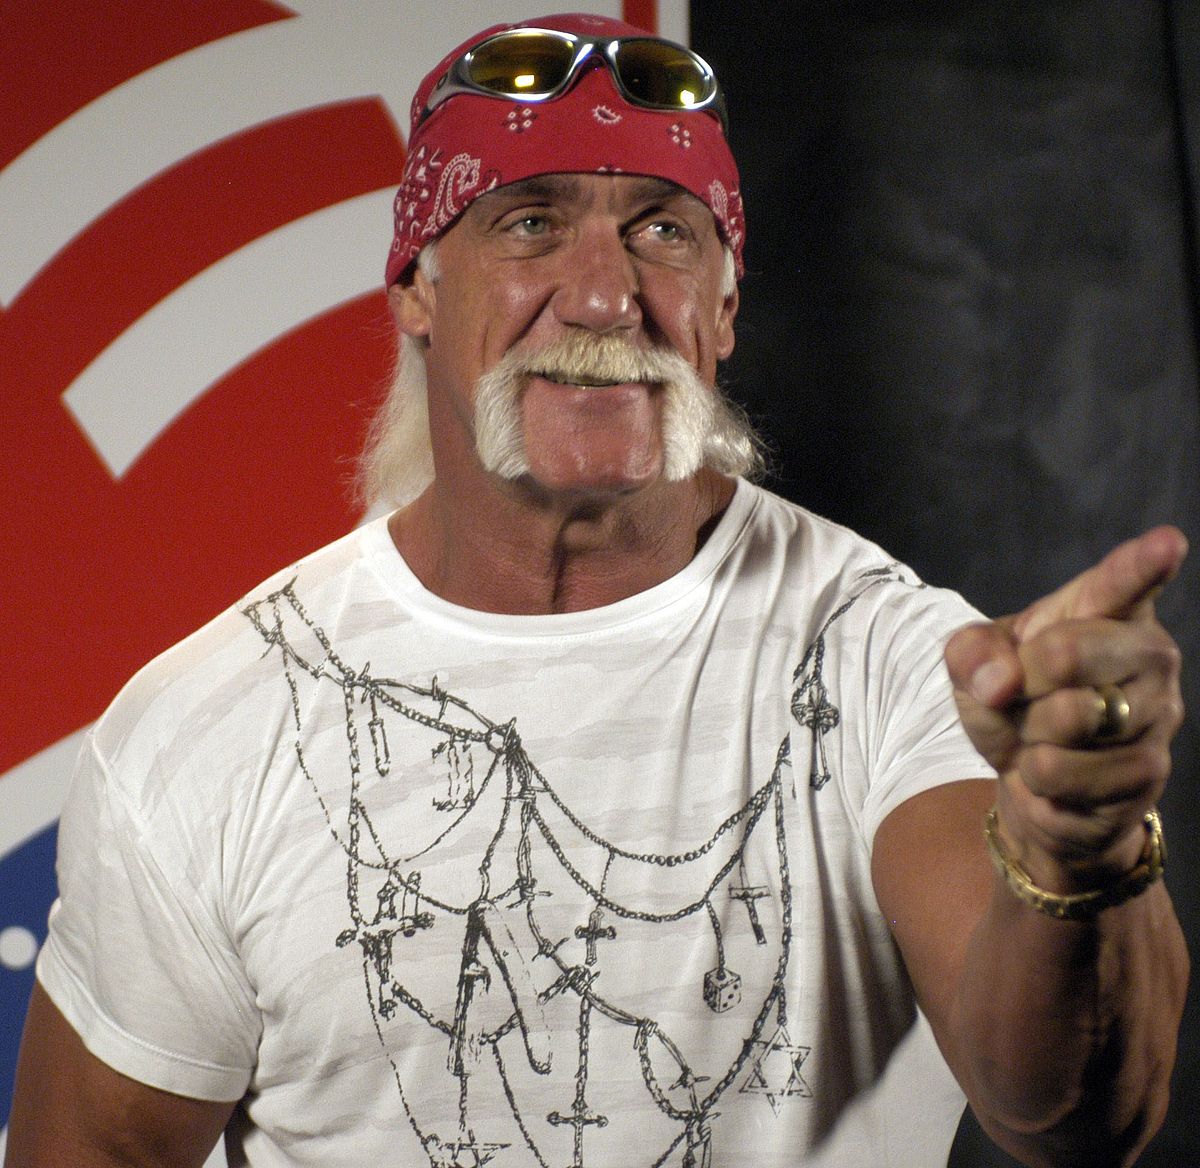 HAPPY BIRTHDAY!  If it\s your birthday today, you are sharing it with Hulk Hogan.  Have an amazing day :-) 